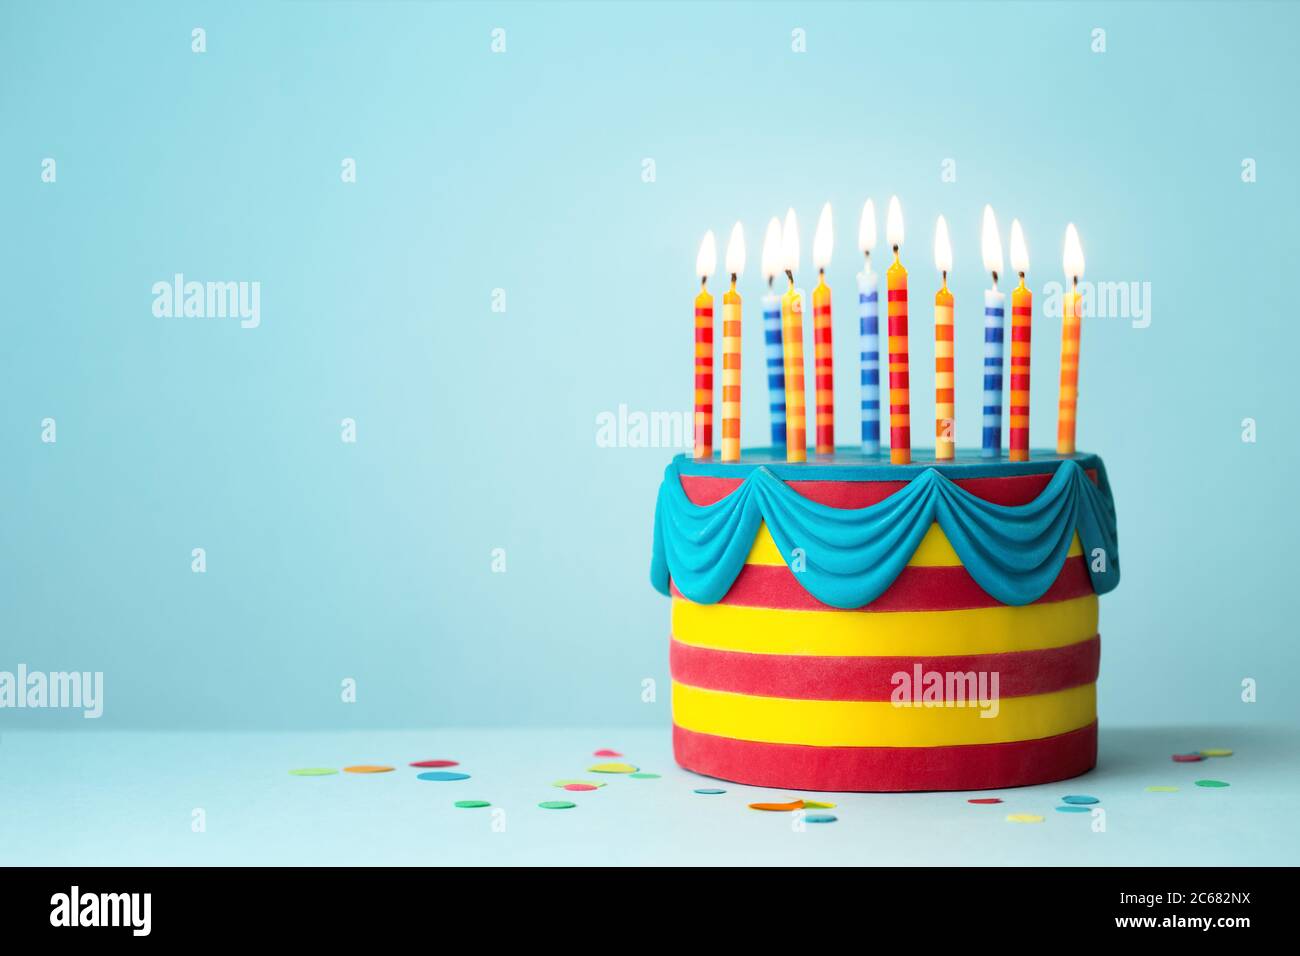 Brightly colored birthday cake with colorful candles Stock Photo